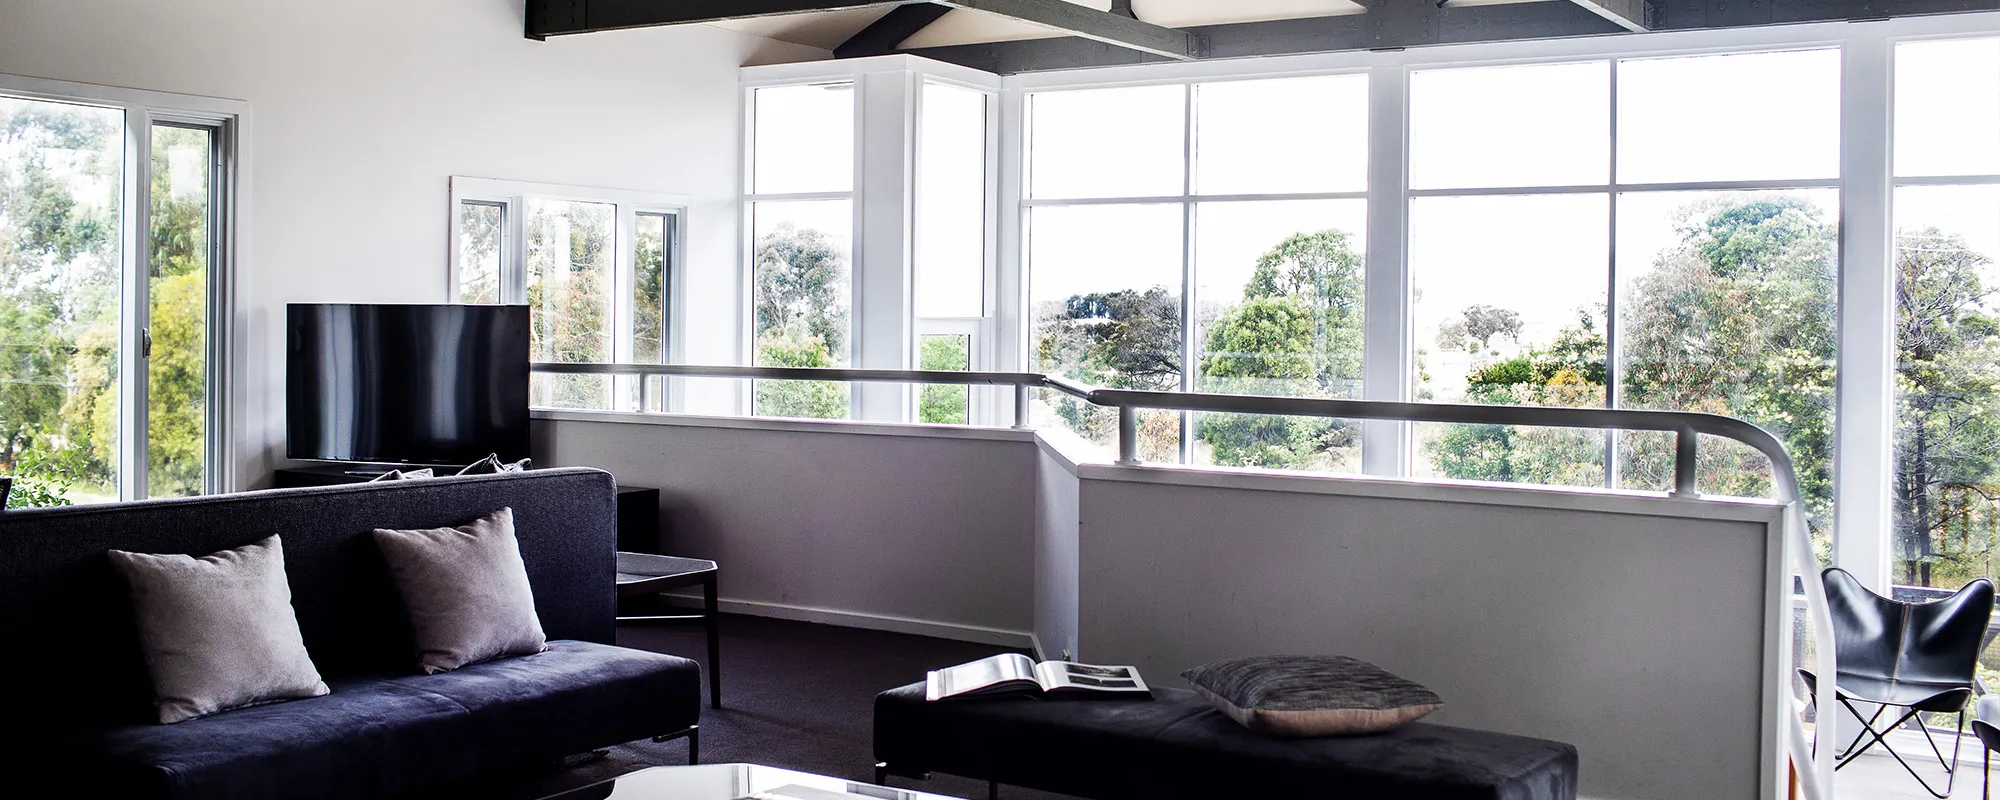 Lancemore Macedon Ranges Conference Venue Regional Conferencing Break Out Room 6 2000x800